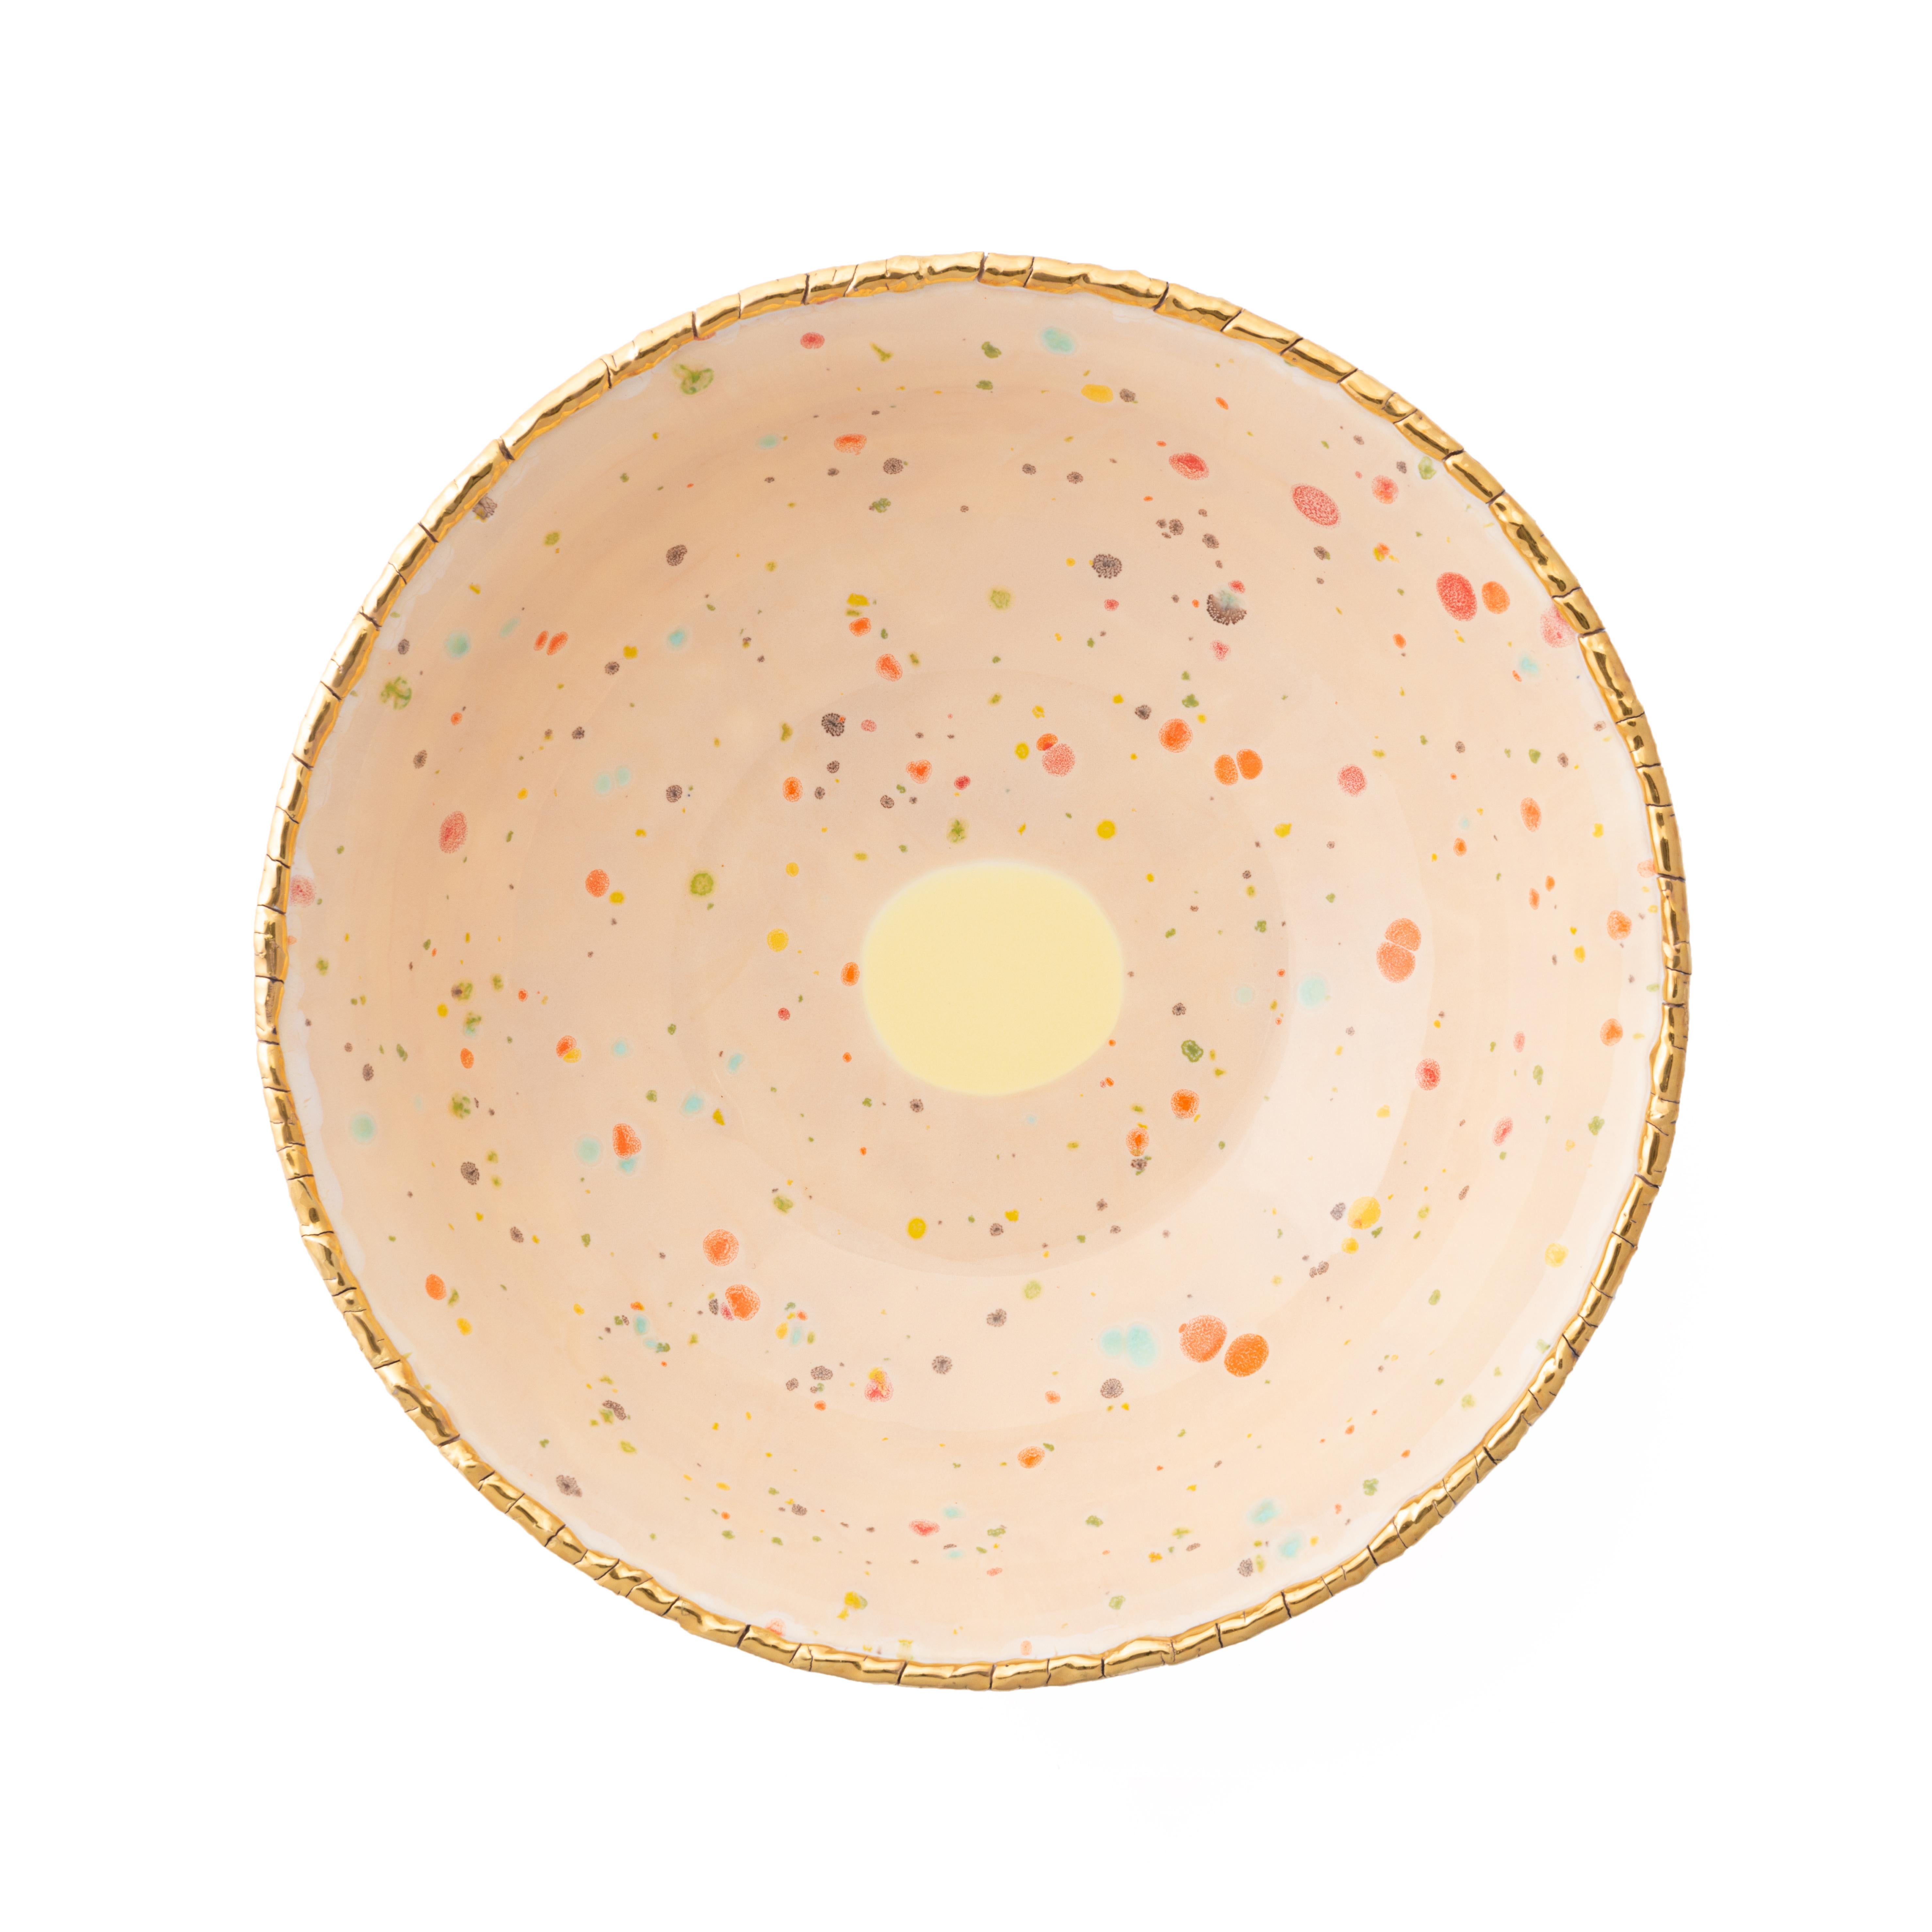 Handcrafted in Italy from the finest porcelain, this blue marble Chestnut salad bowl has an original golden crackled rim emphasizing the warm sandy surface covered with little multicolor dots and the bright yellow splotch at the center.

Salad